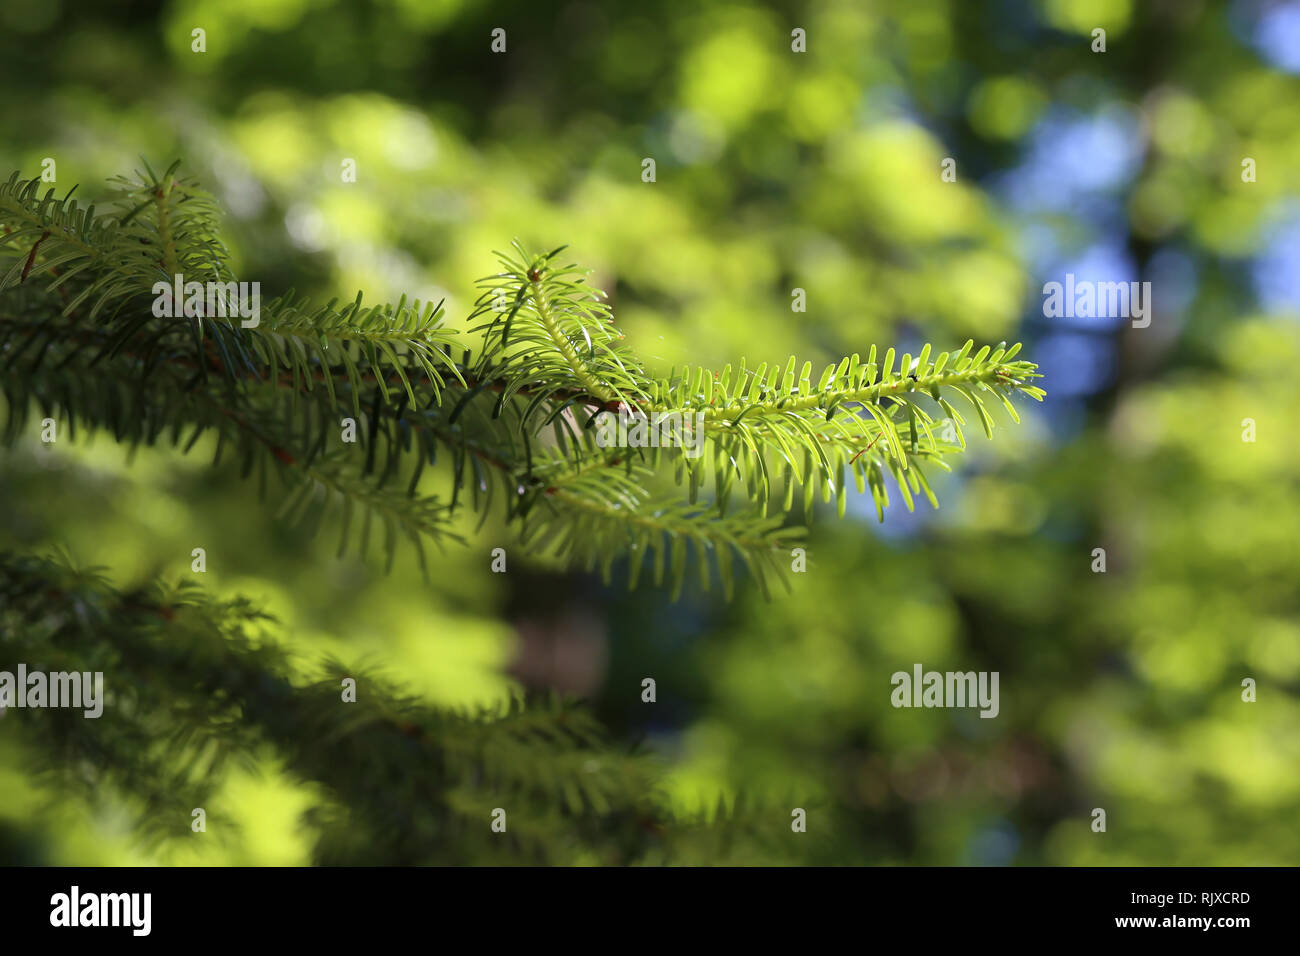 Coniferous trees in forest / Needles close-up Stock Photo